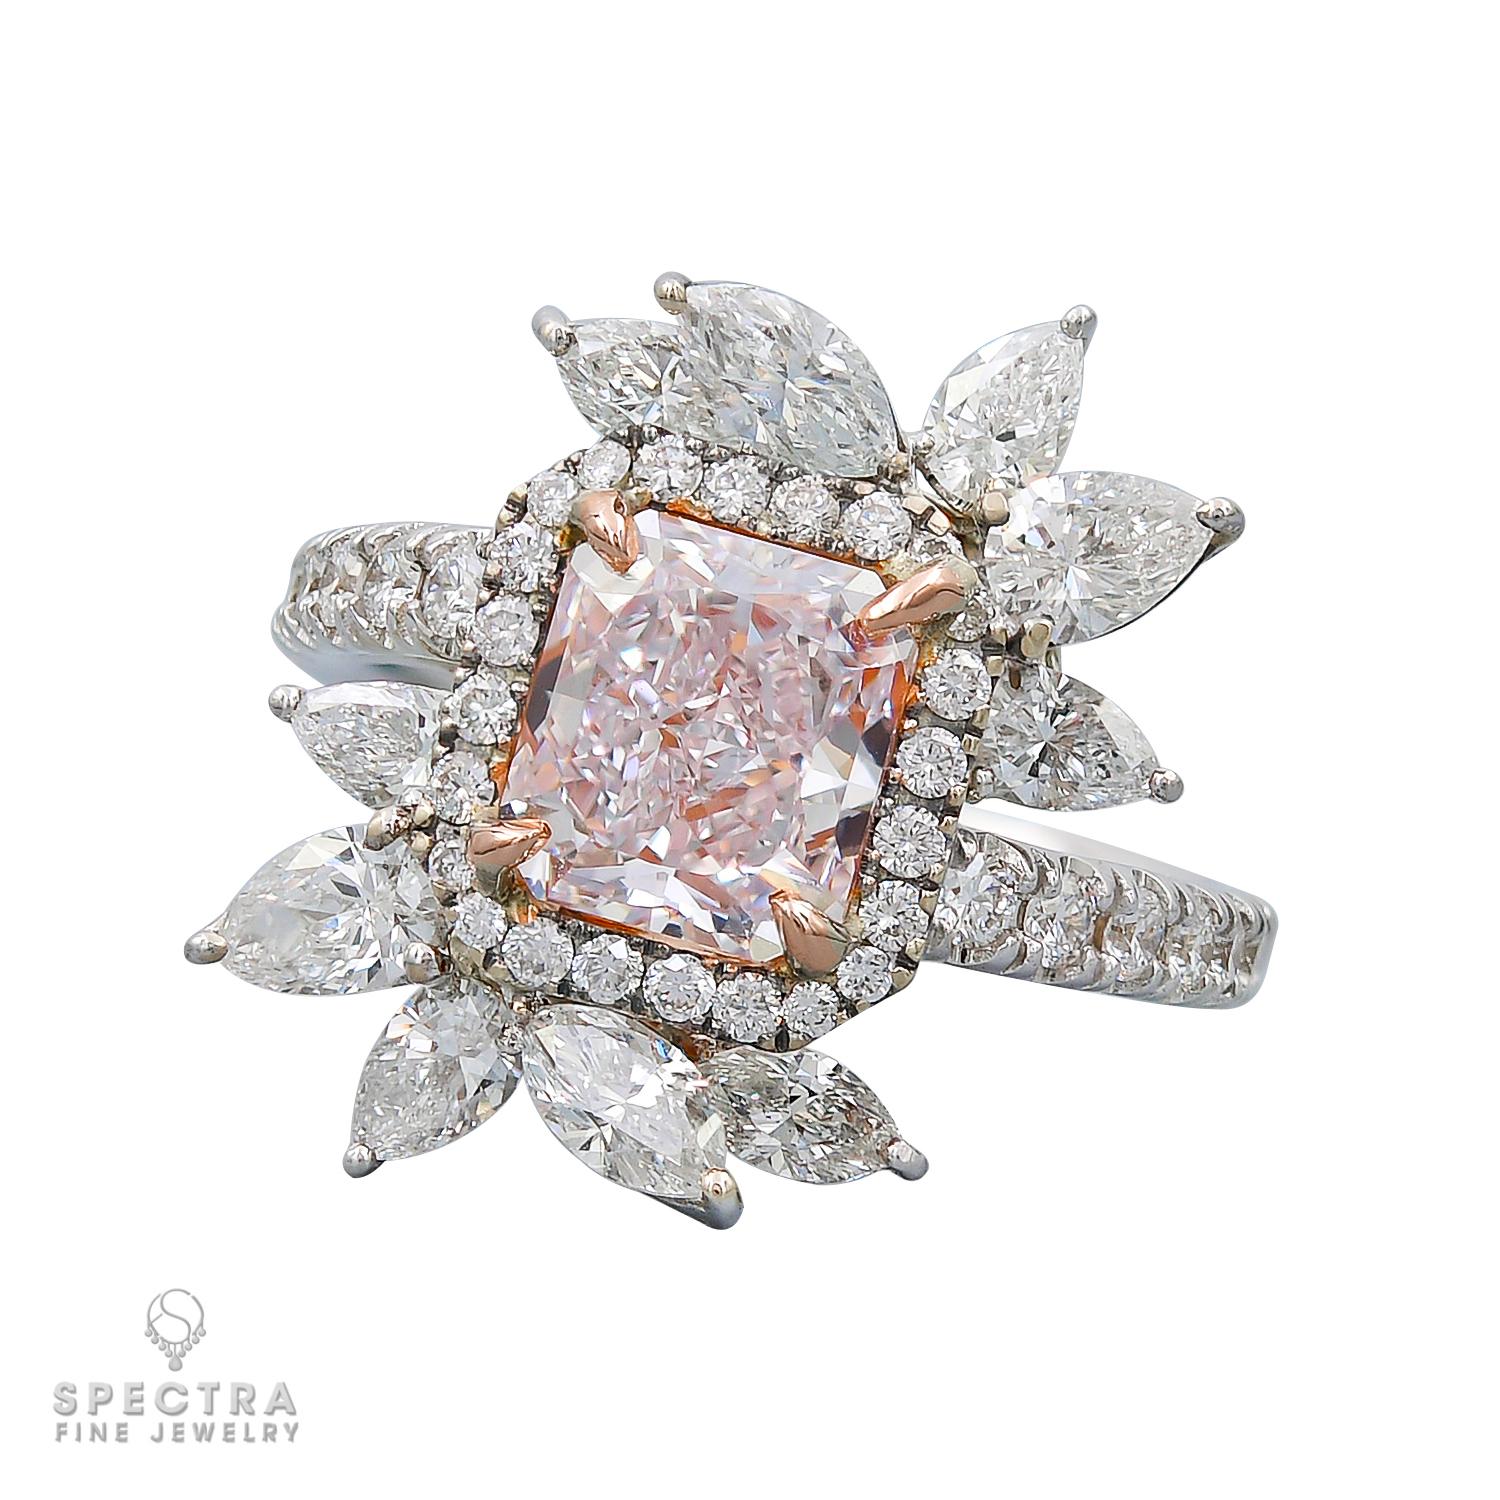 Behold Spectra Fine Jewelry's latest masterpiece, the GIA Certified 2.62 Carat Pink Diamond Cocktail Ring - a mesmerizing symbol of elegance and allure. This exceptional cocktail ring showcases a radiant-cut faint pink diamond at its center,